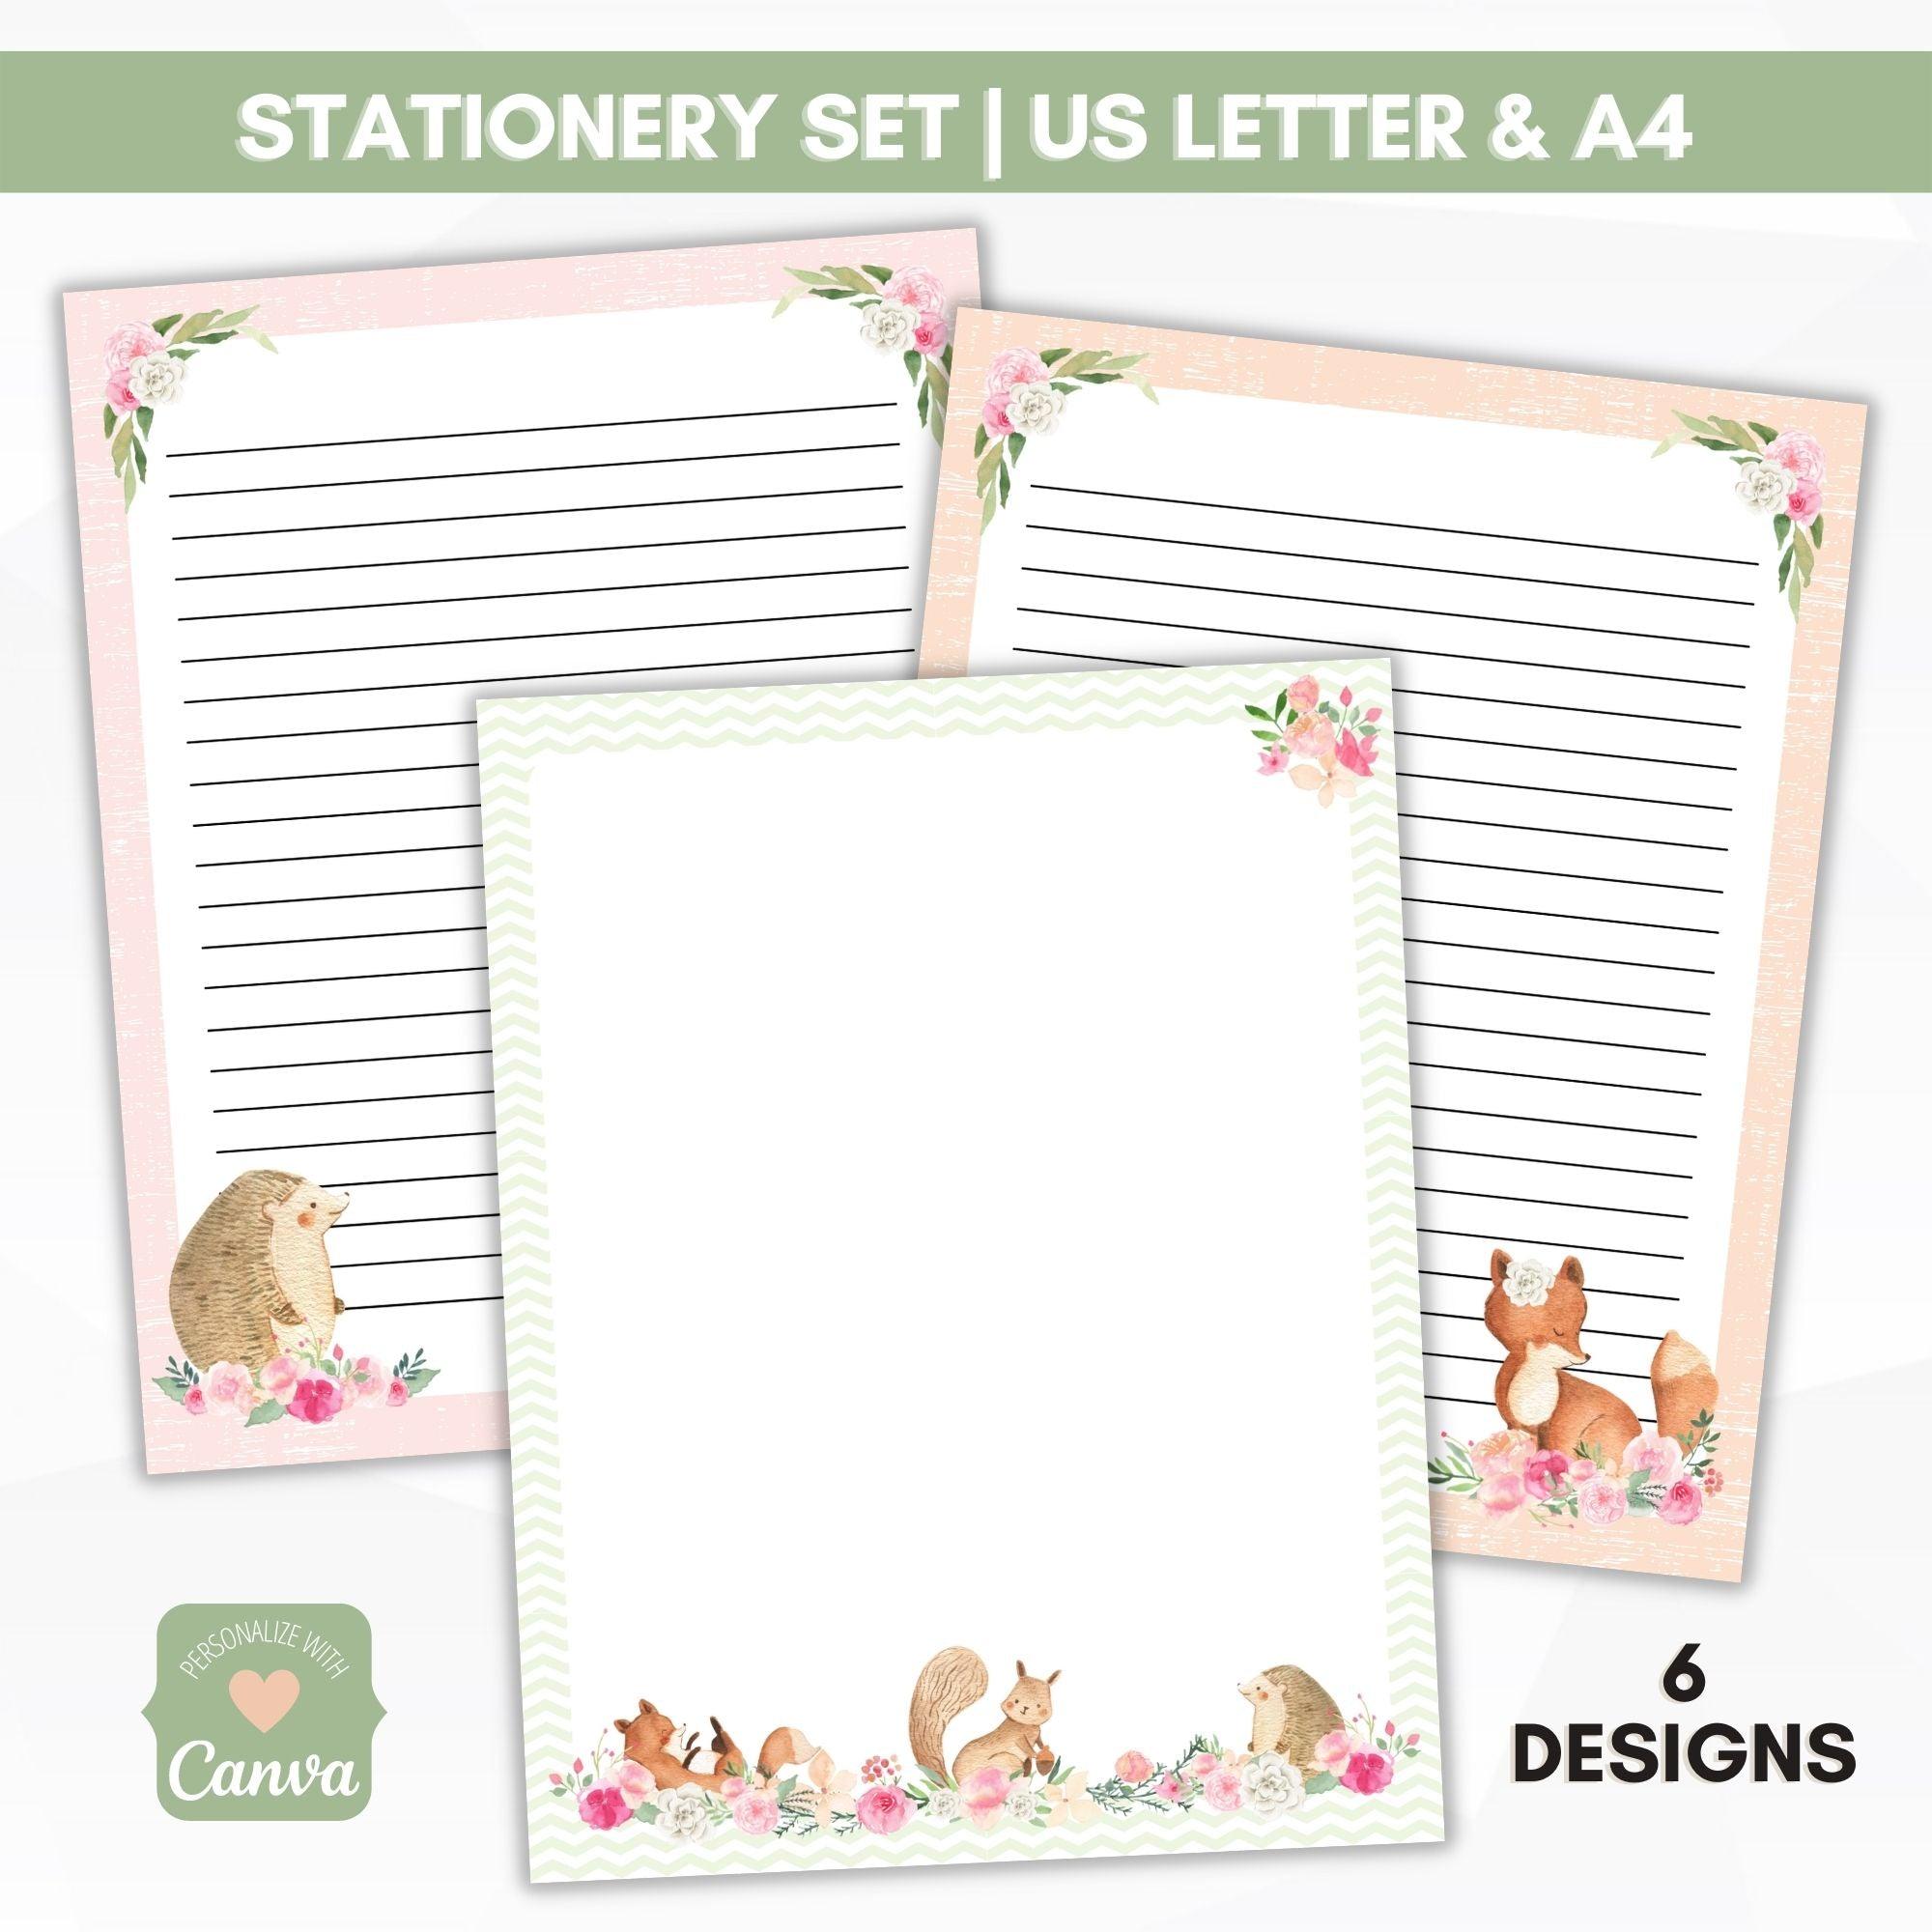 Animal-themed stationery samples